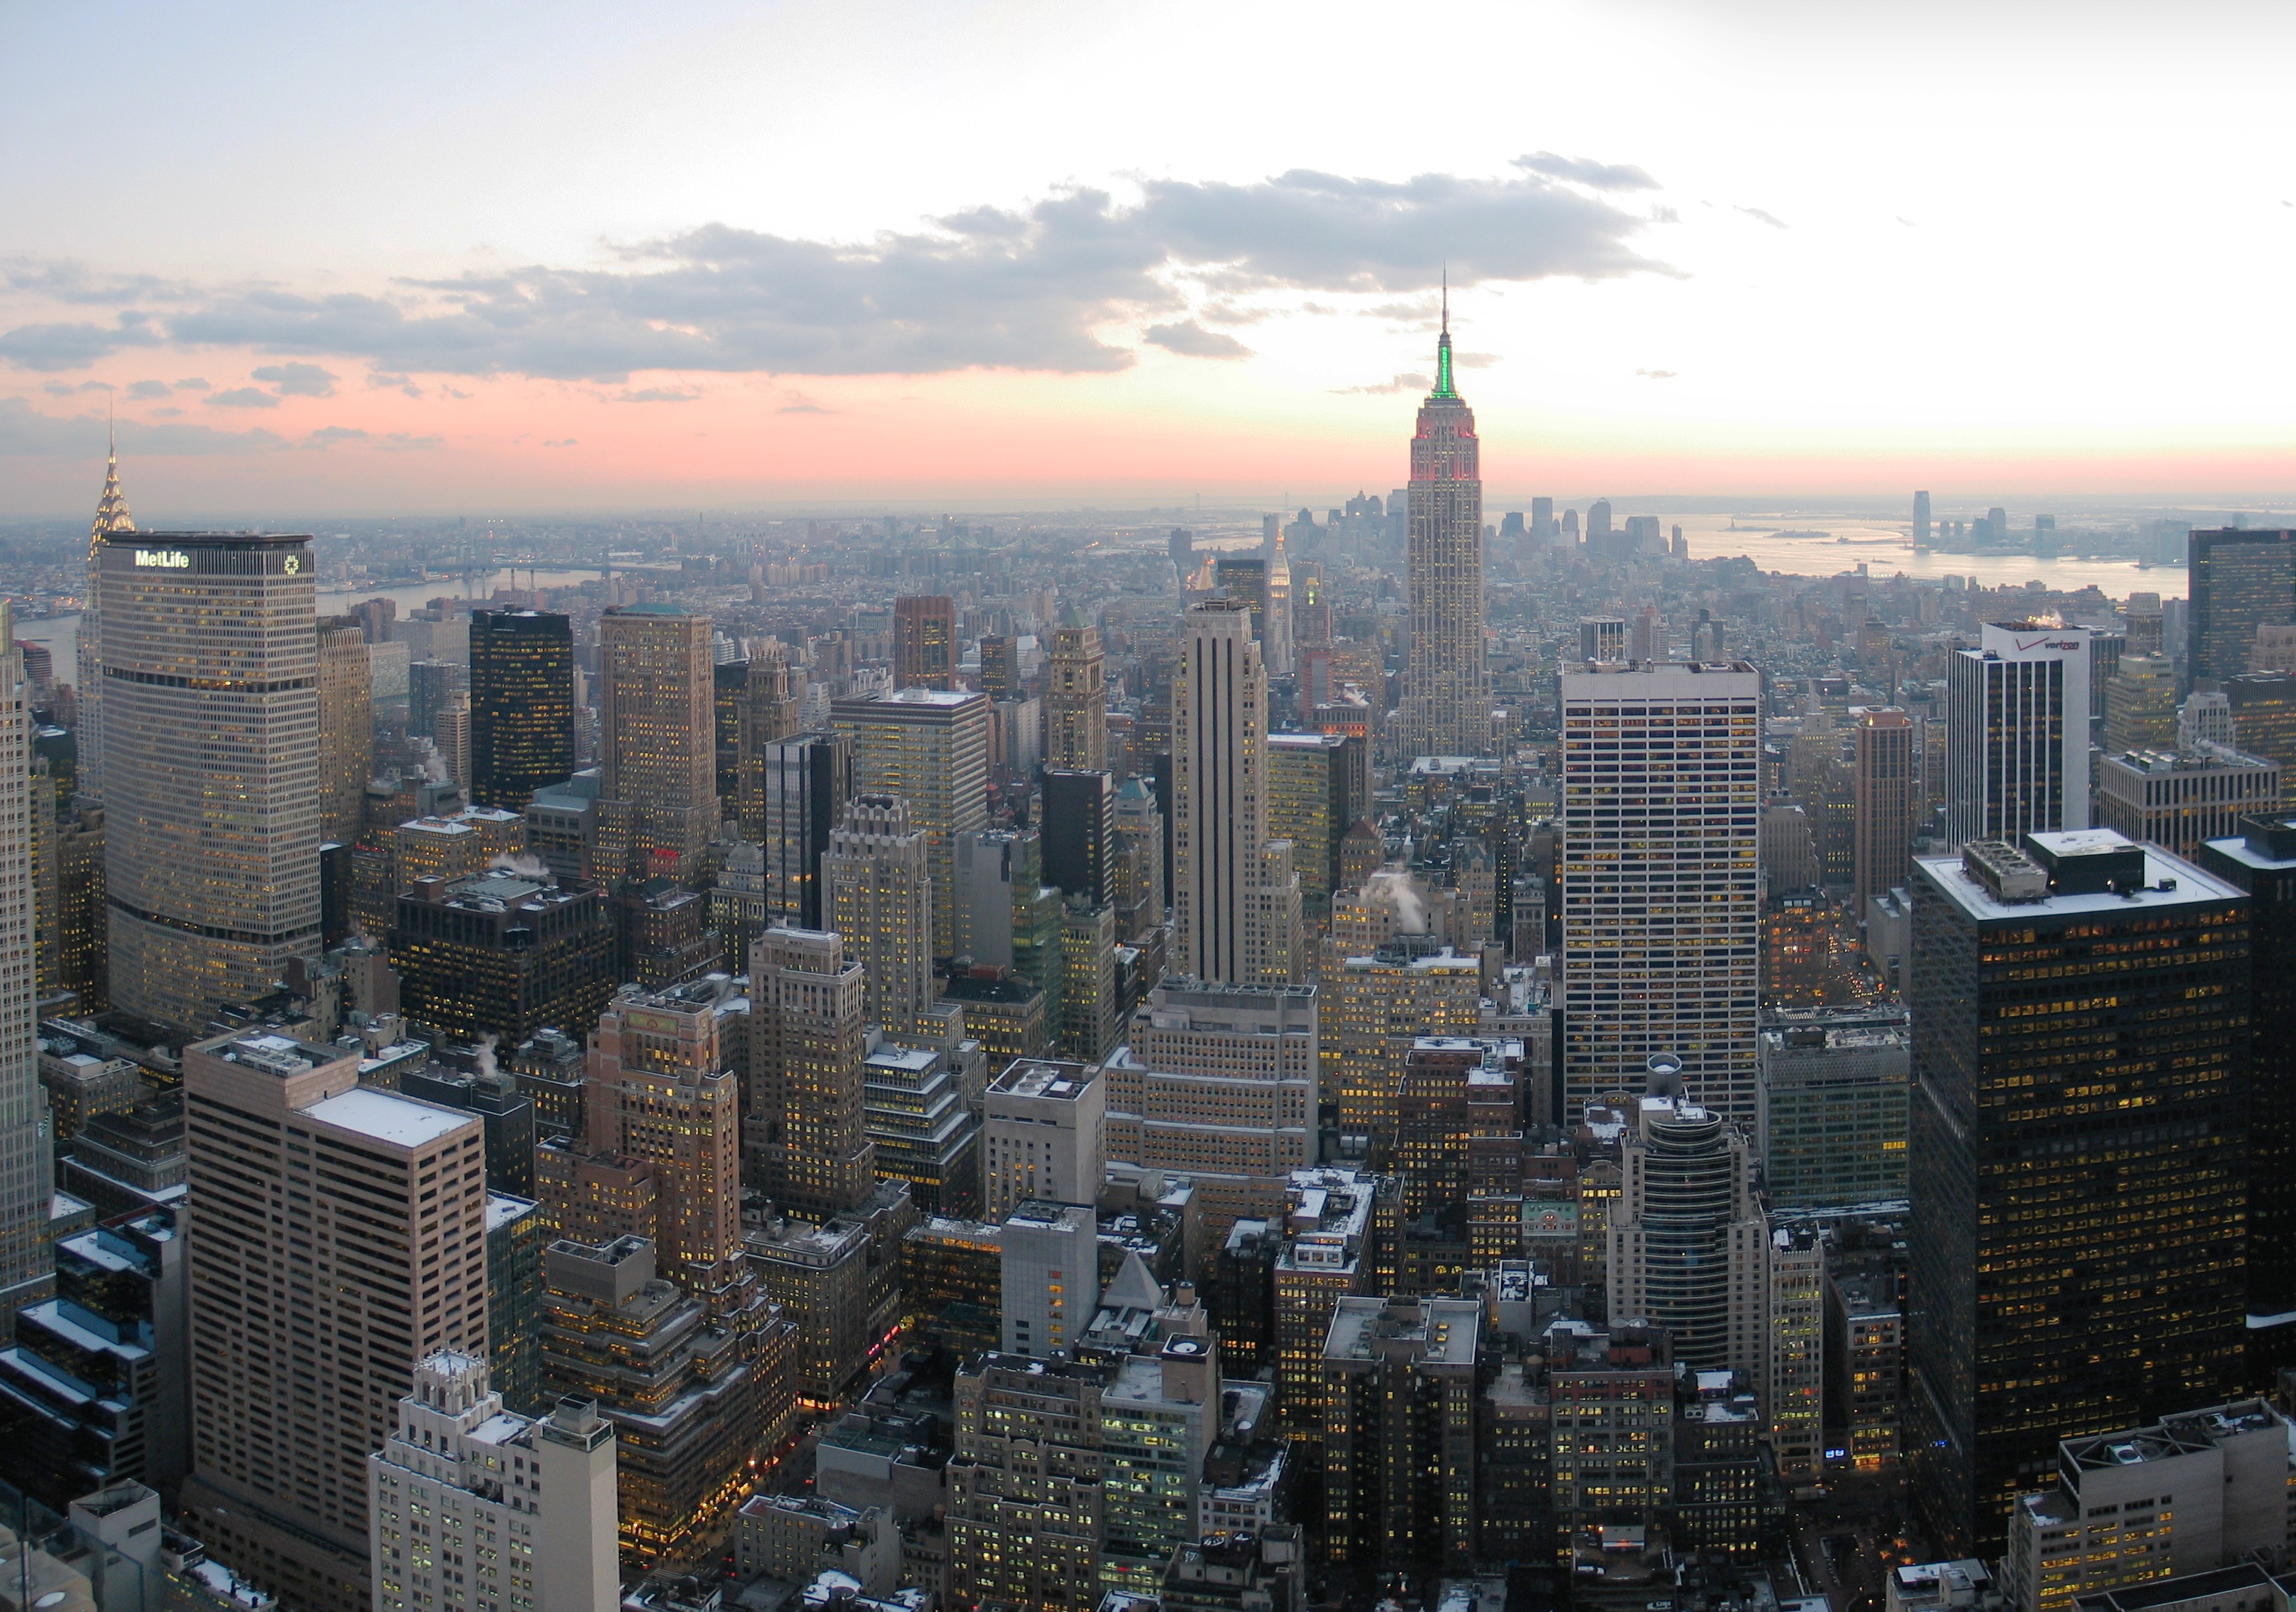 NYC_wideangle_south_from_Top_of_the_Rock.jpg